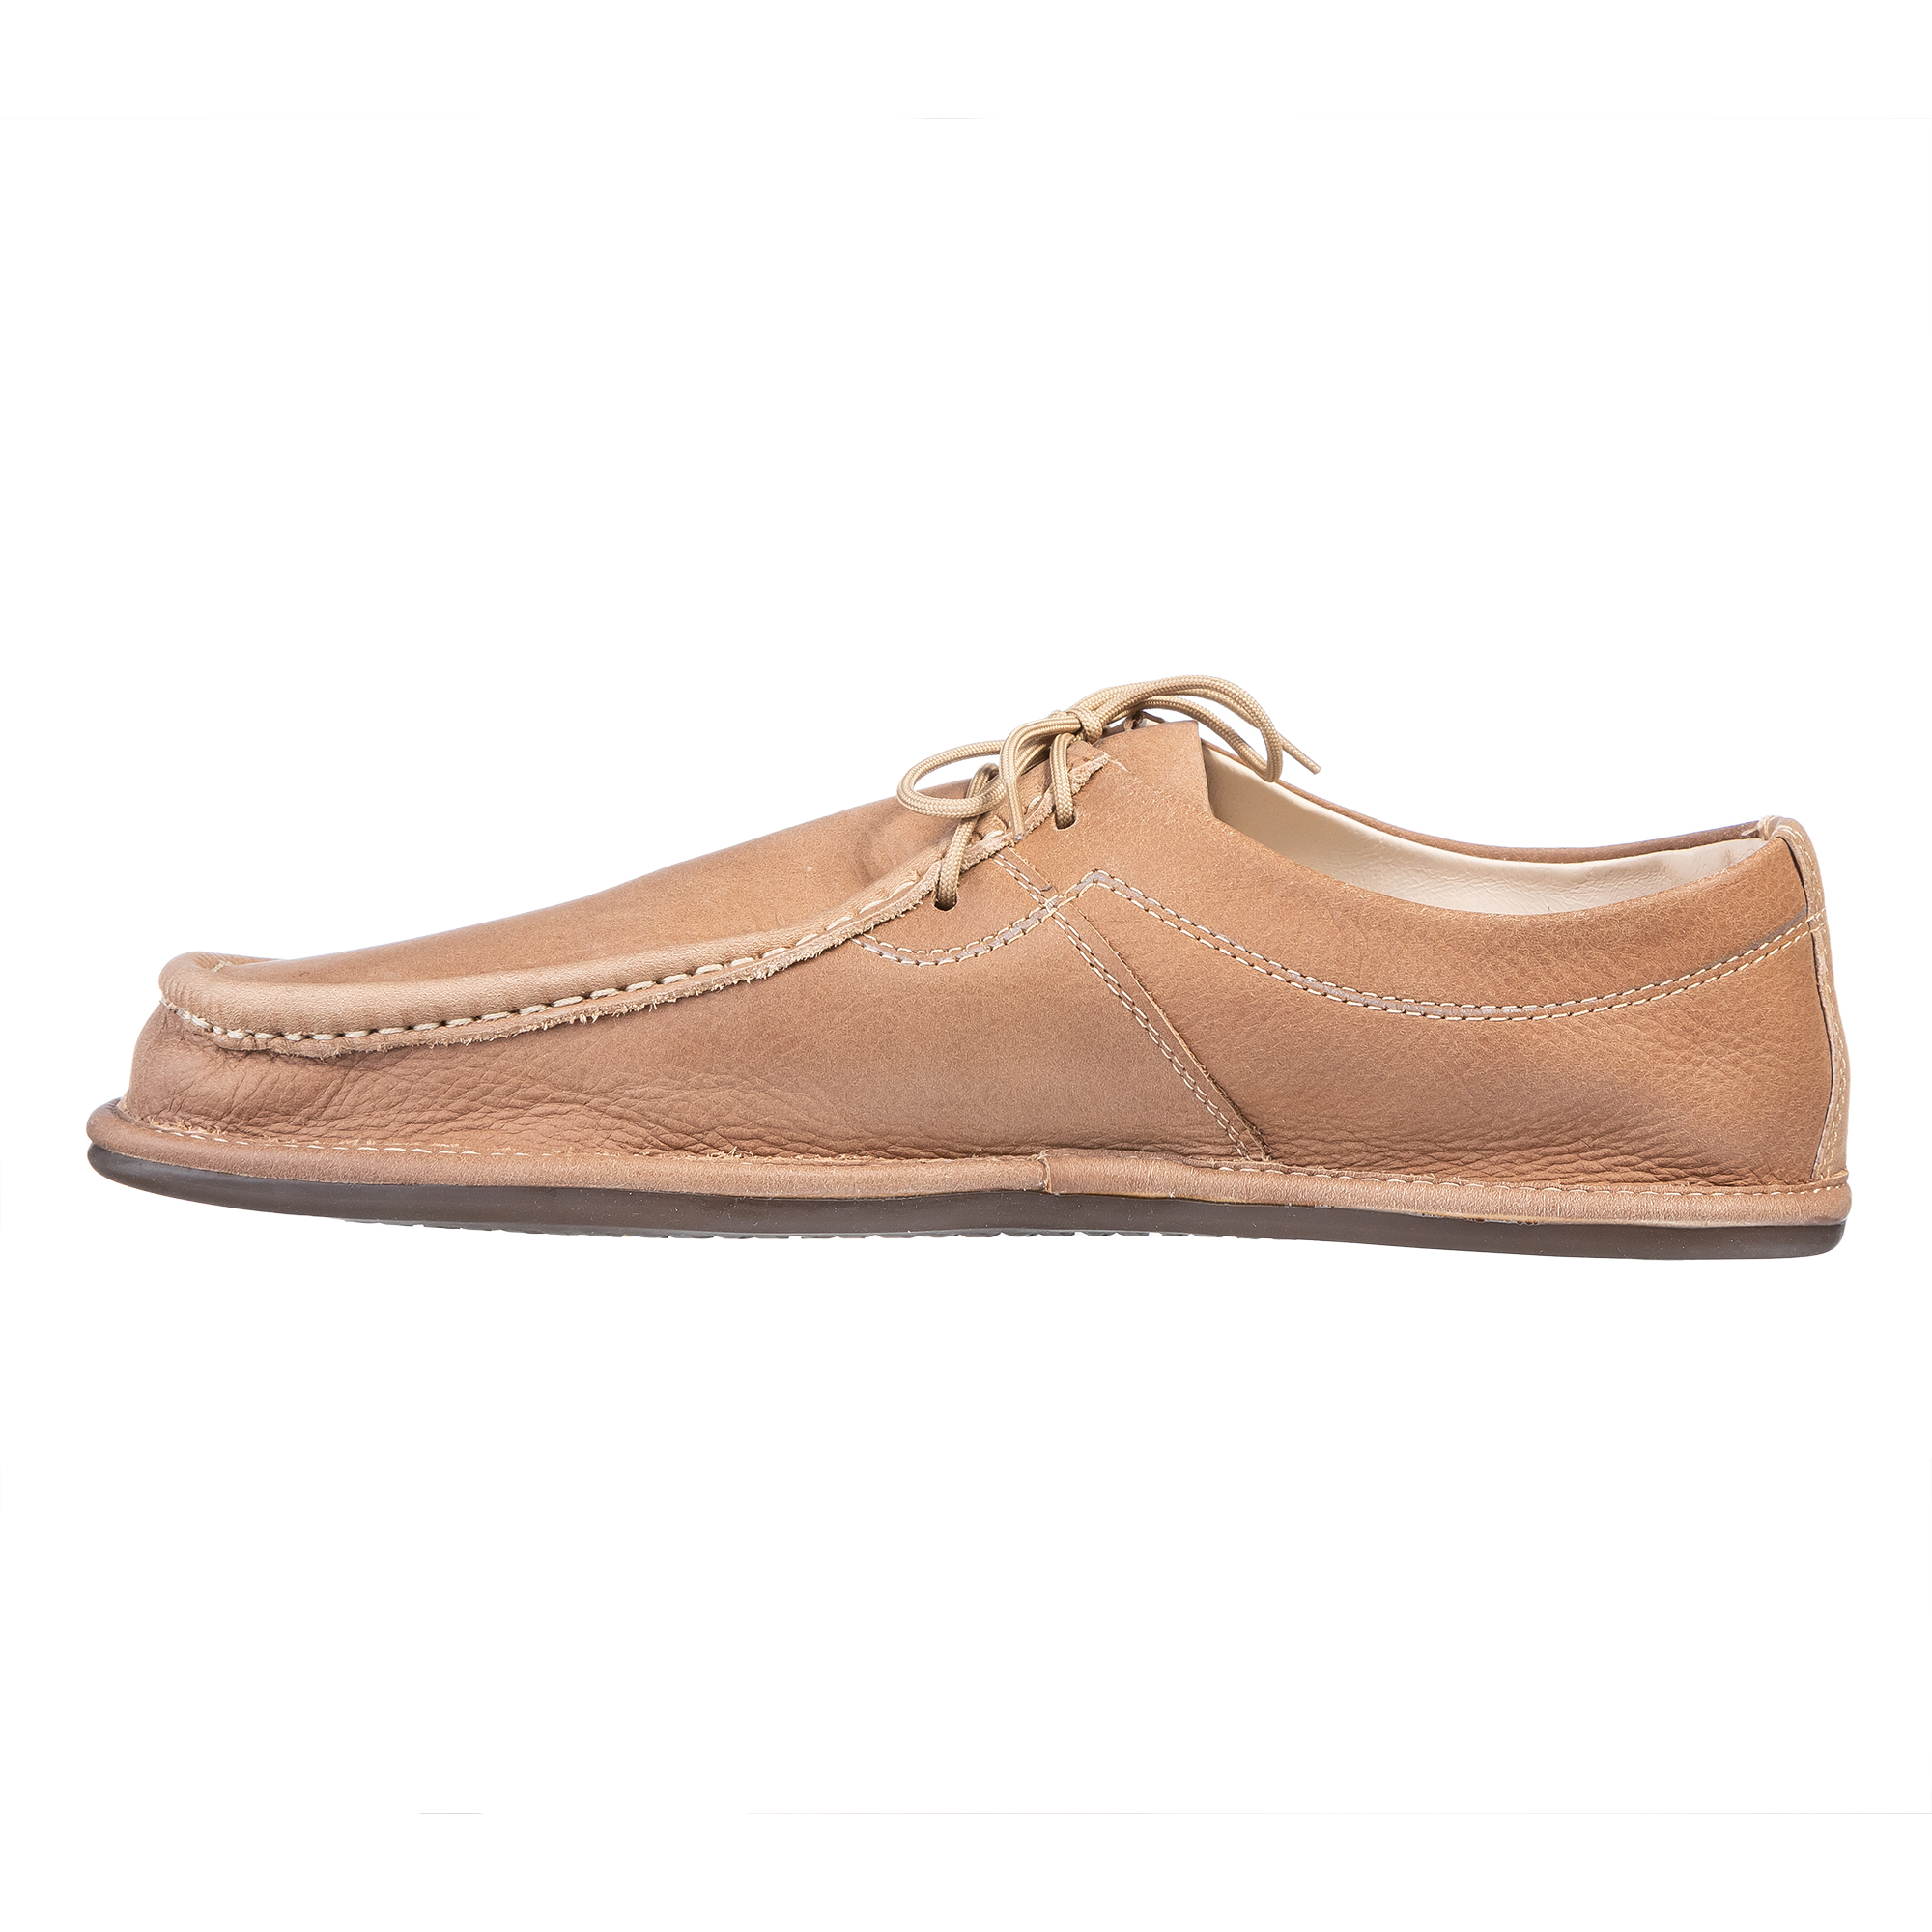 OFFICE MENS TAN SUEDE LACE-UP SHOES CAMERON DESIGN BOXED NEW UK 6 